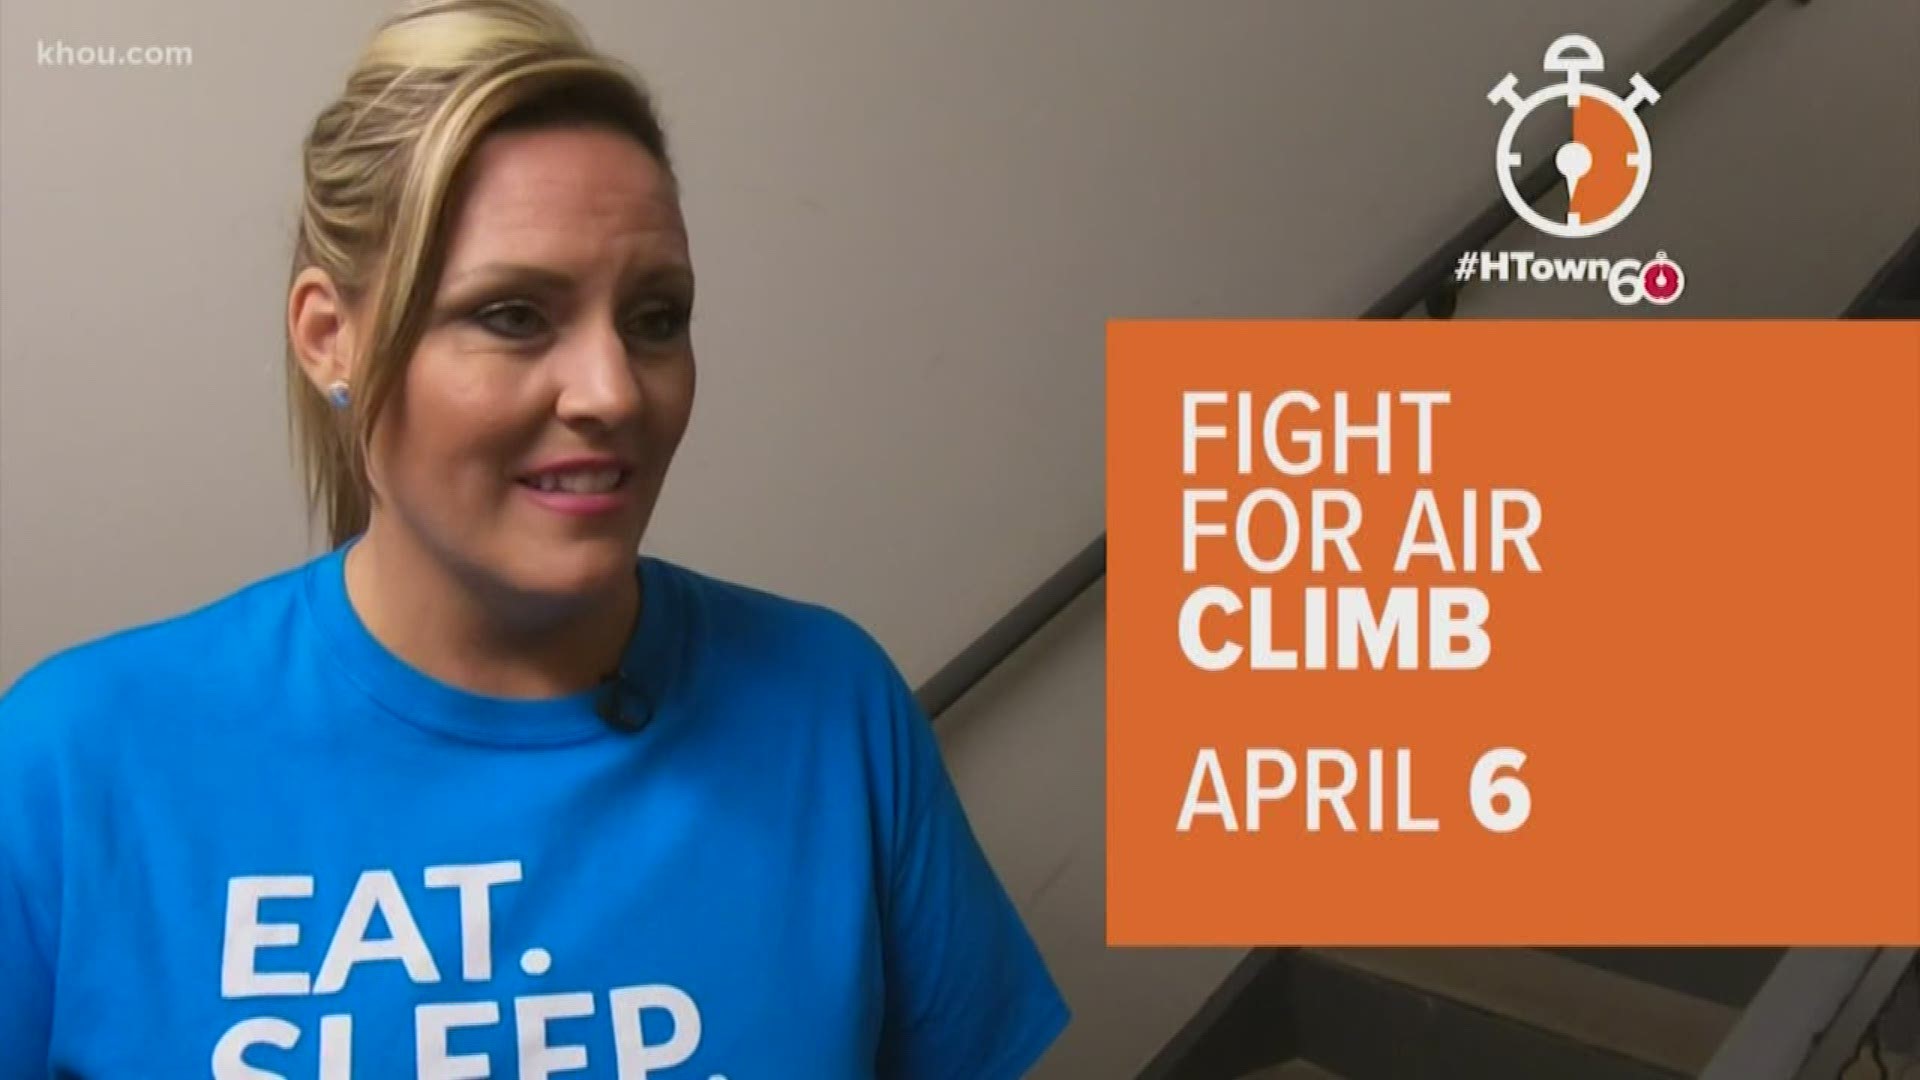 When it comes right down to it, most of us will choose an elevator ride over a trip up the stairs. After all, a hike up a flight or two could leave you out of breath. That struggle is something folks with lung disease know too well. It’s a constant fight for air.